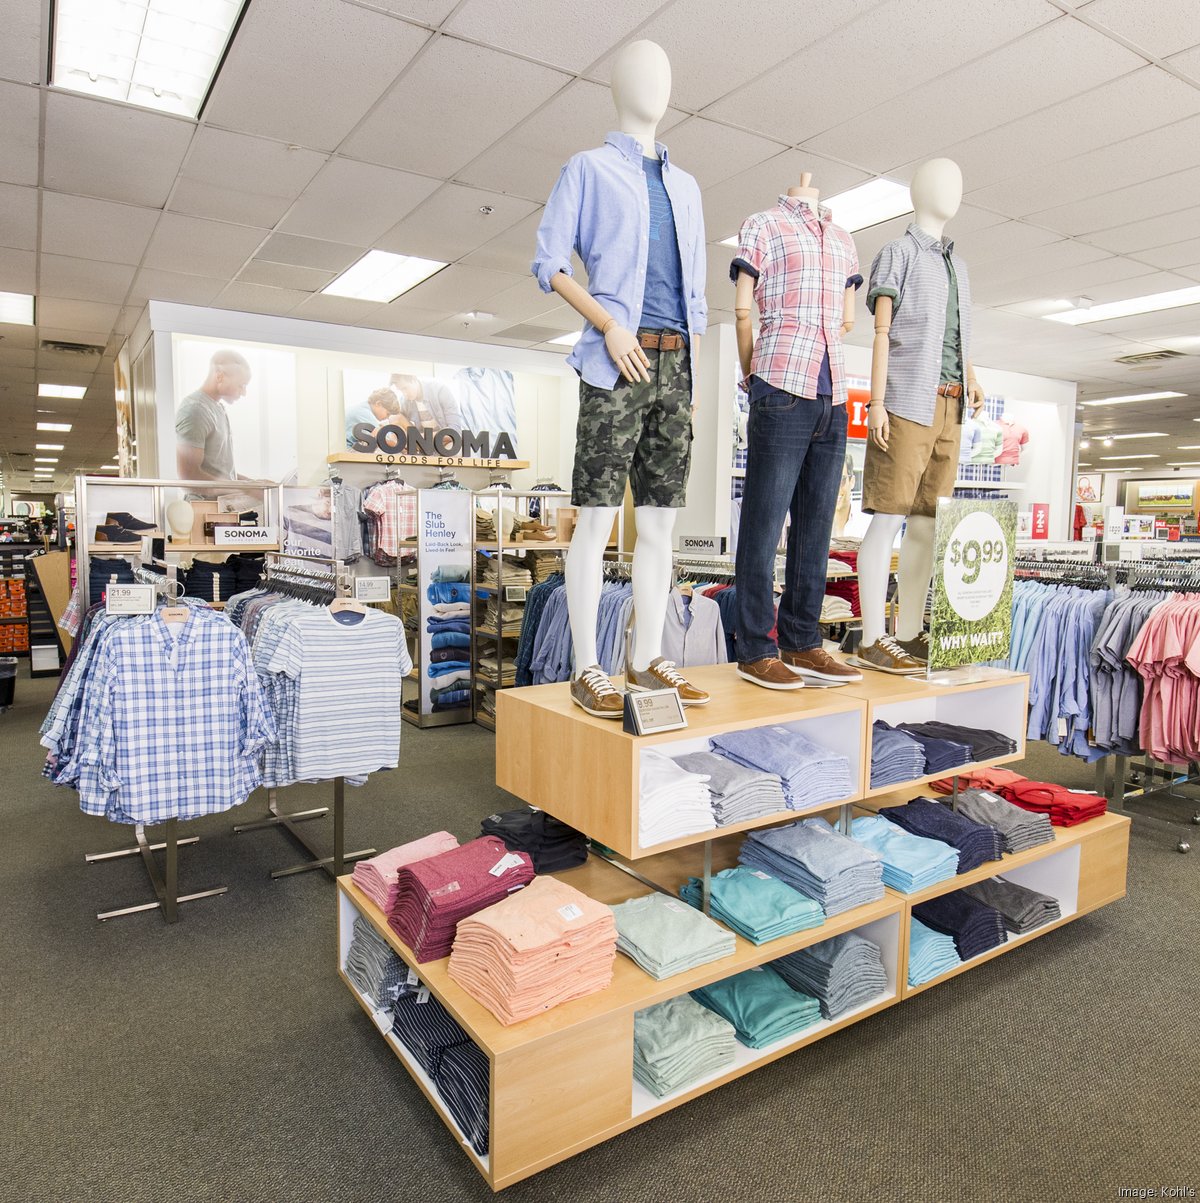 Kohl's taking a fresh approach to home merchandising in new